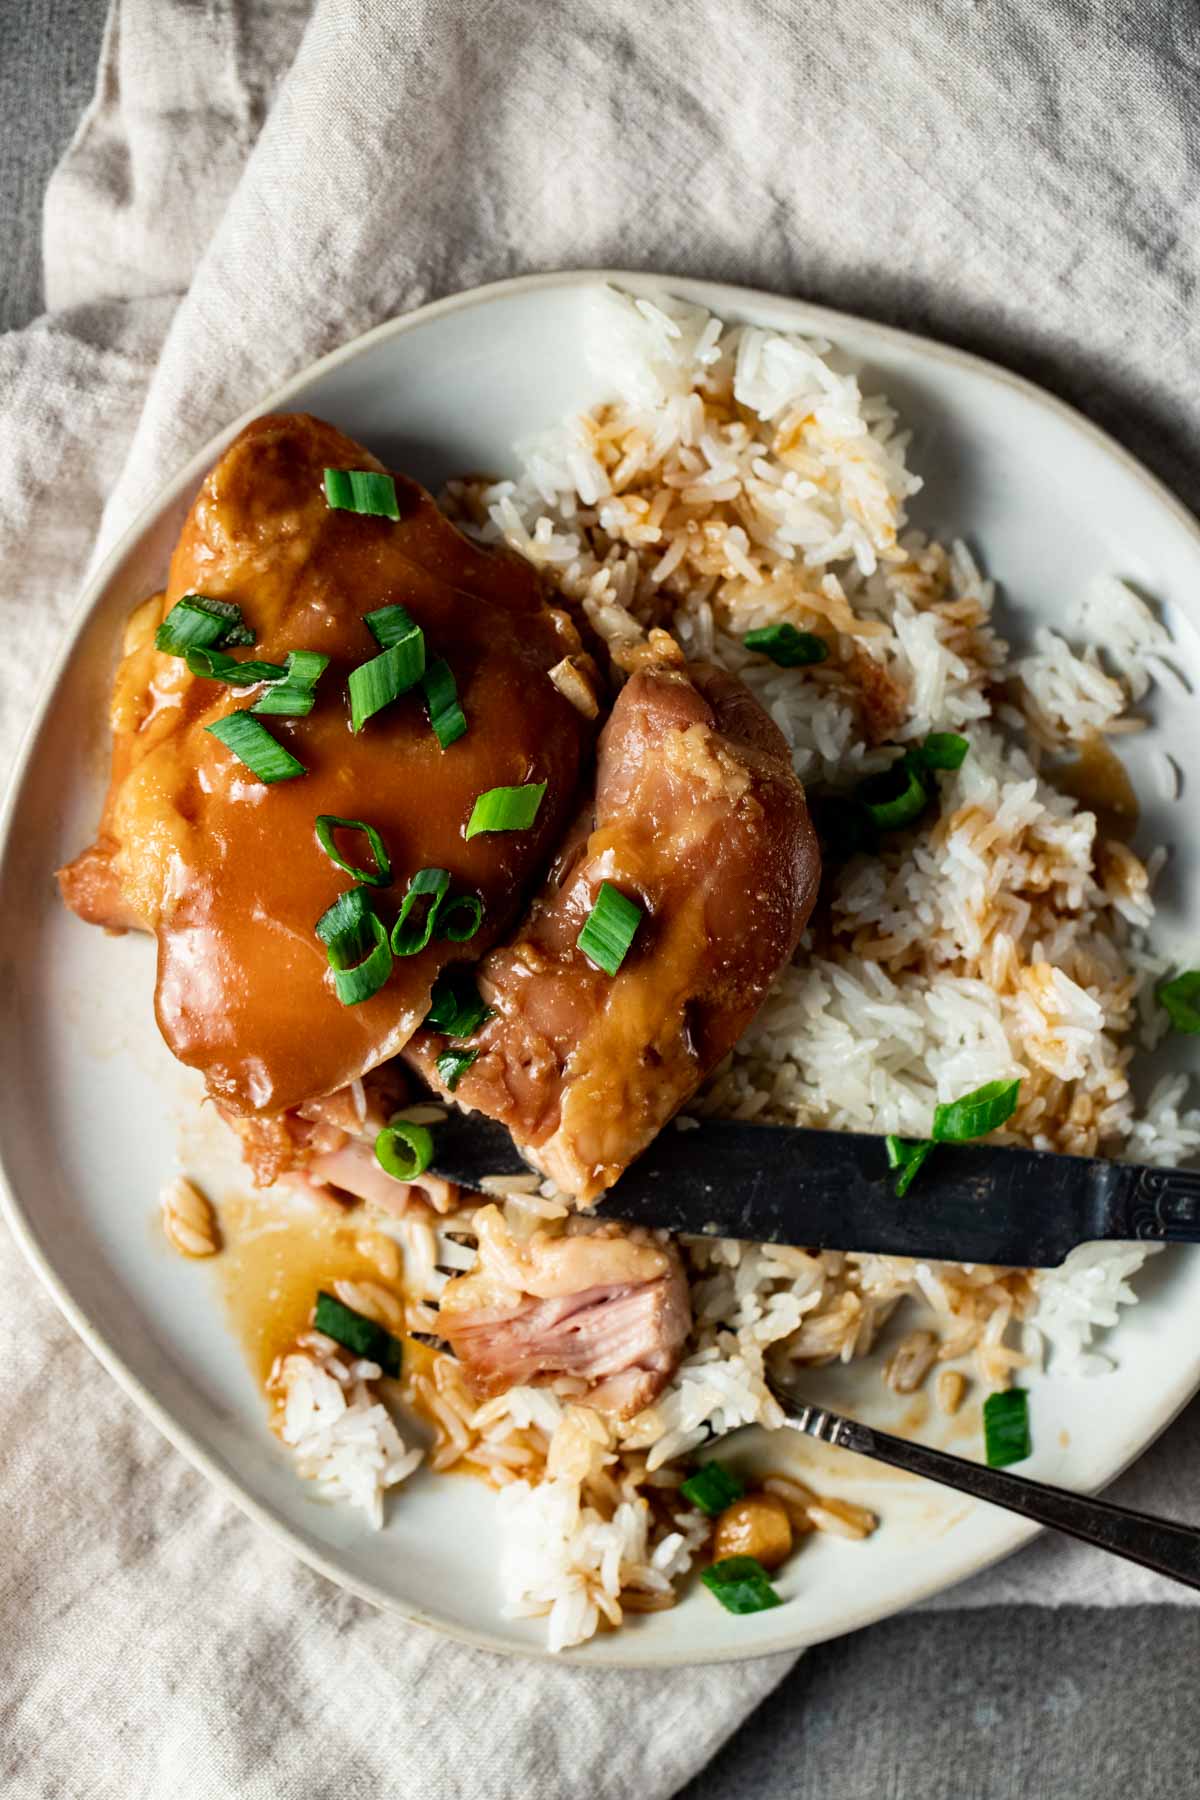 A teriyaki chicken thigh being cut with a fork and knife on a plate.